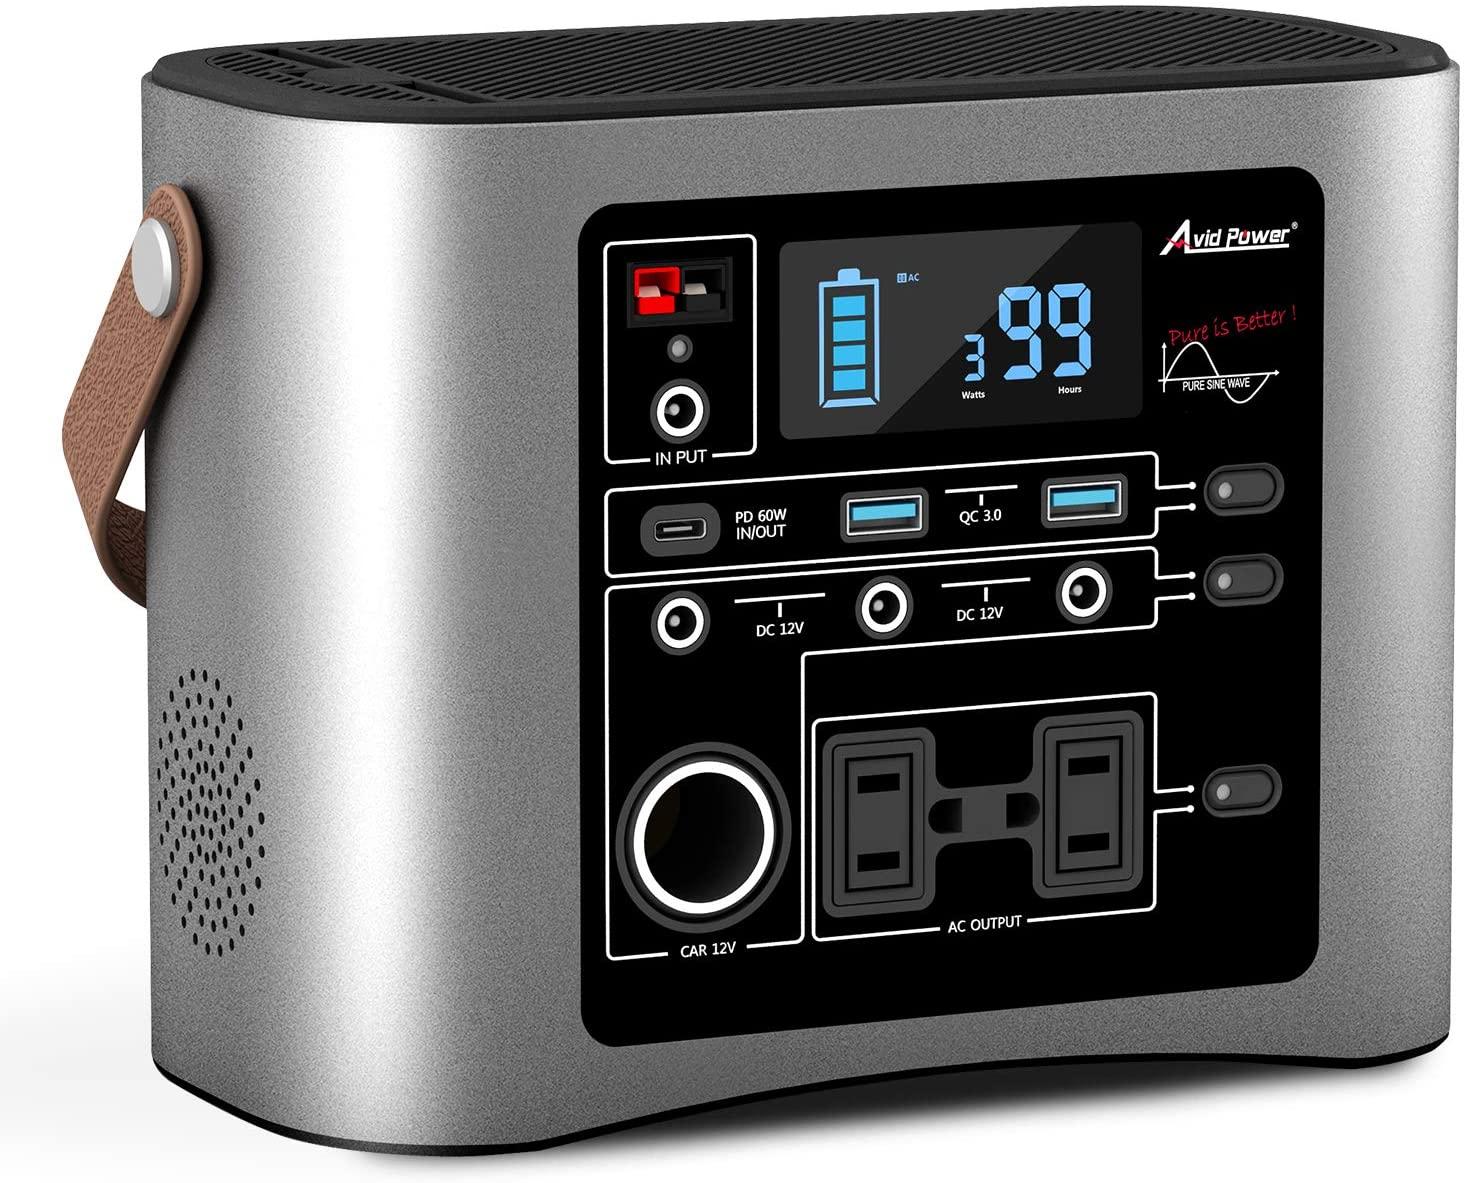 Avid Power 296Wh Portable Power Station for $135.99 Shipped